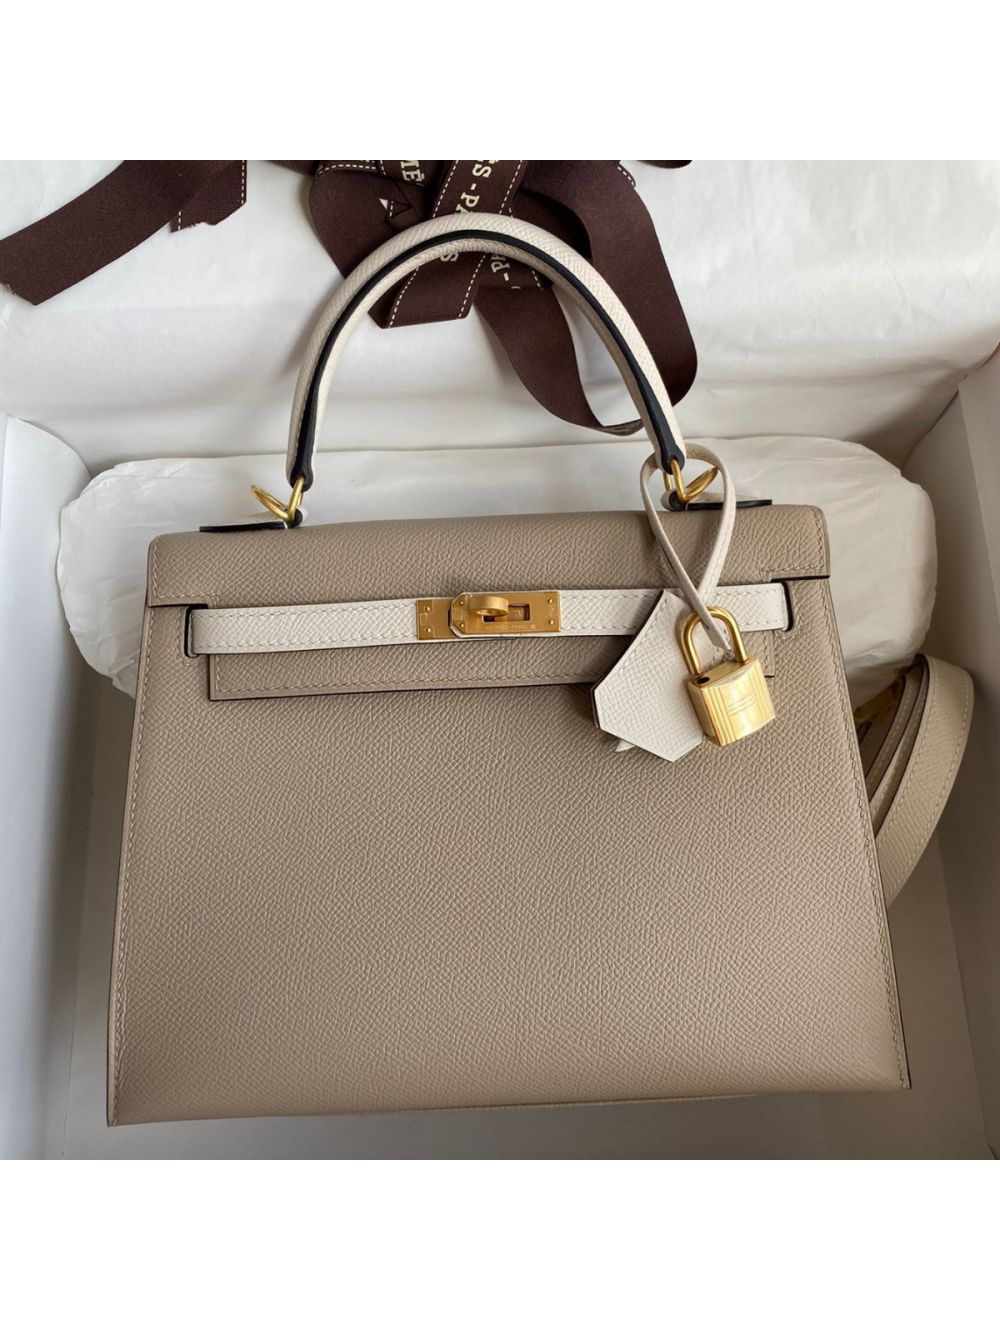 Review) Hermes Birkin 25 Craie Special Order with Horseshoe Stamp